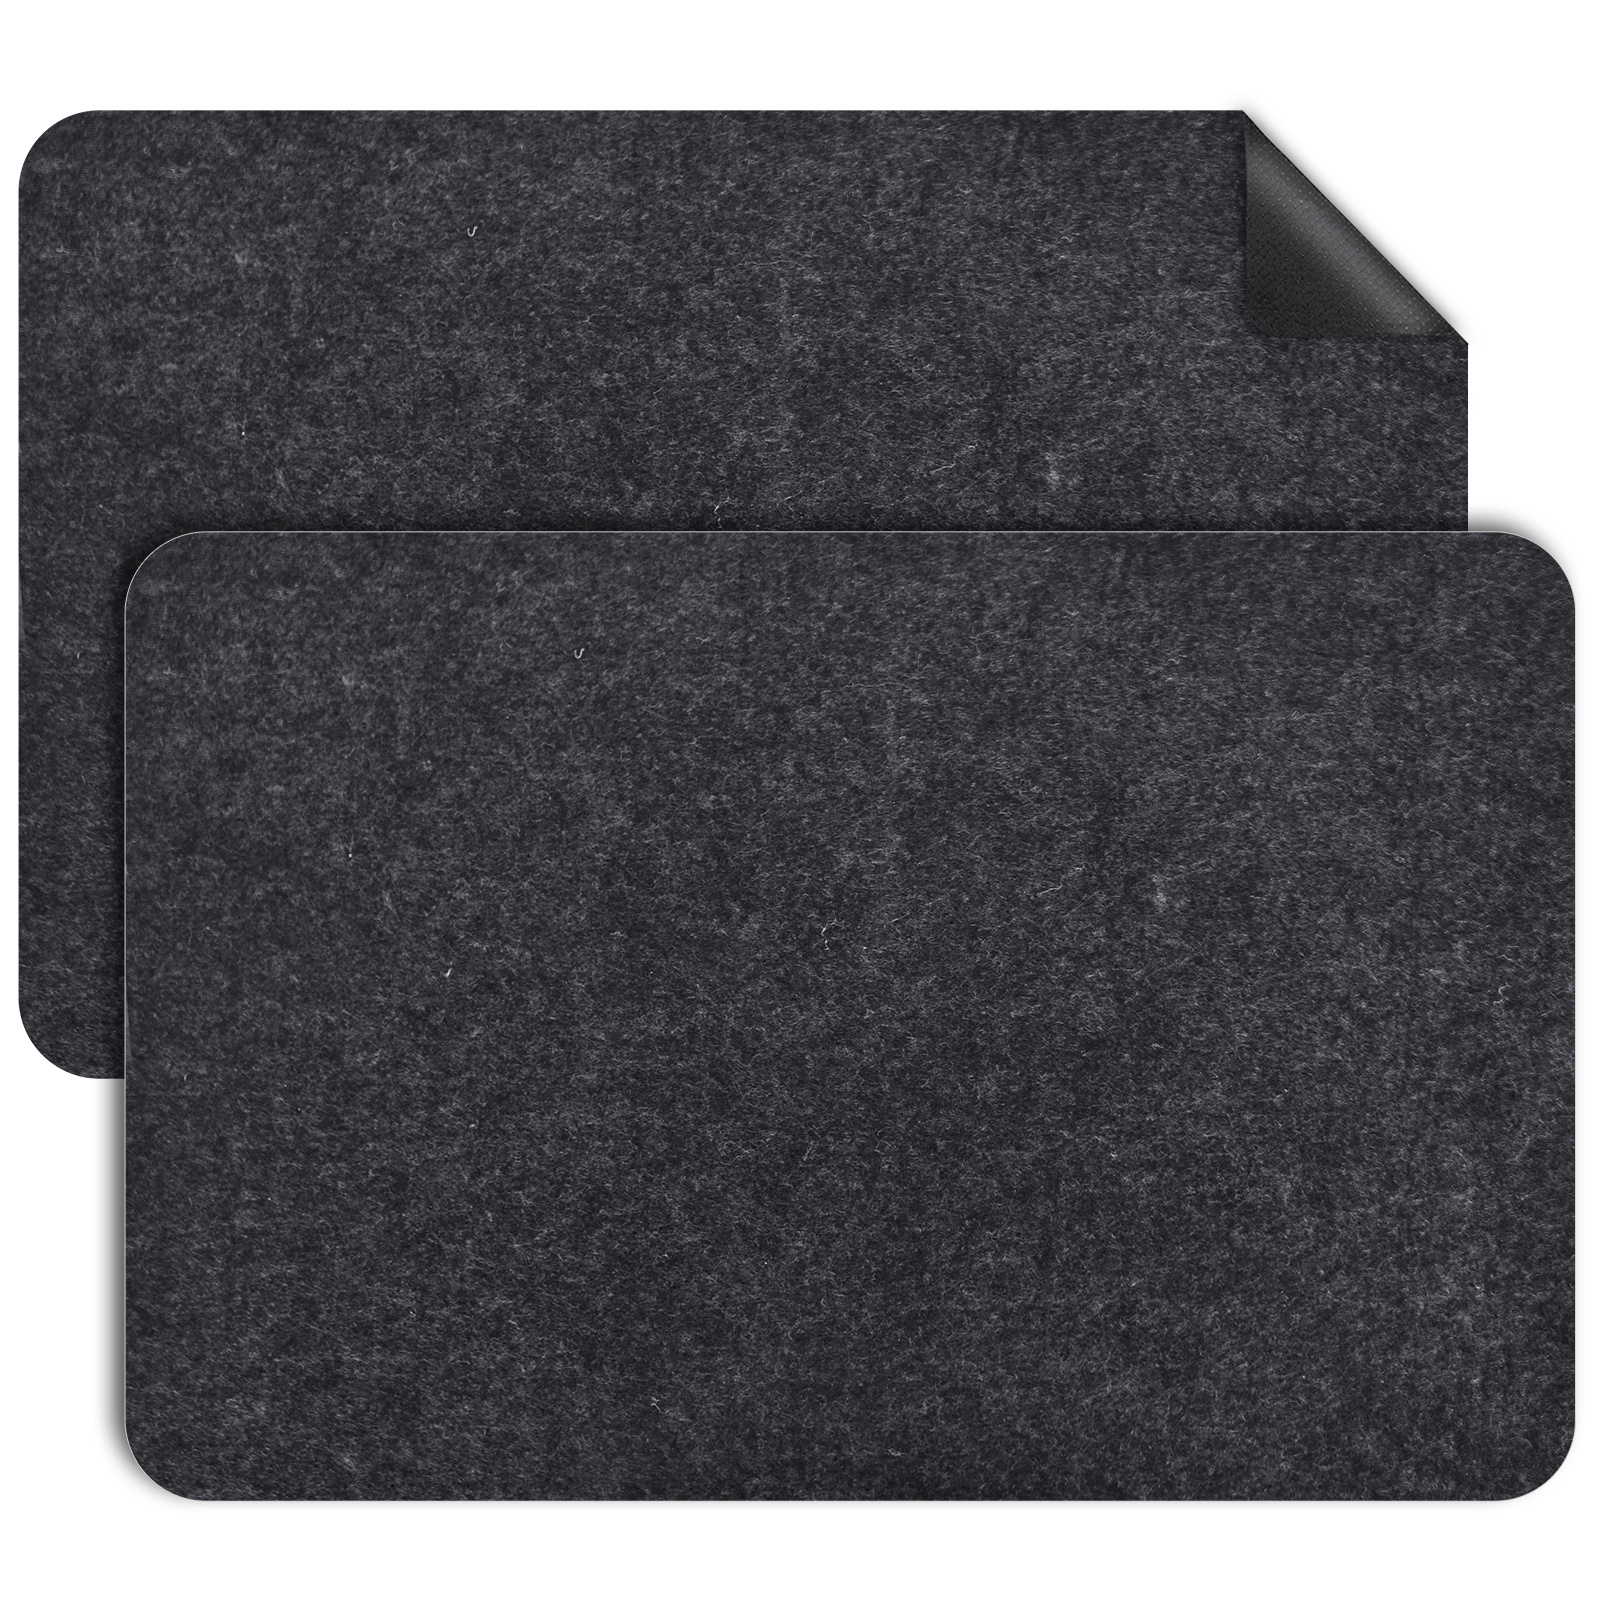 AEIOU Silicone Placemat in Oat Speckle Size 18.90 x 11.81 x 0.1